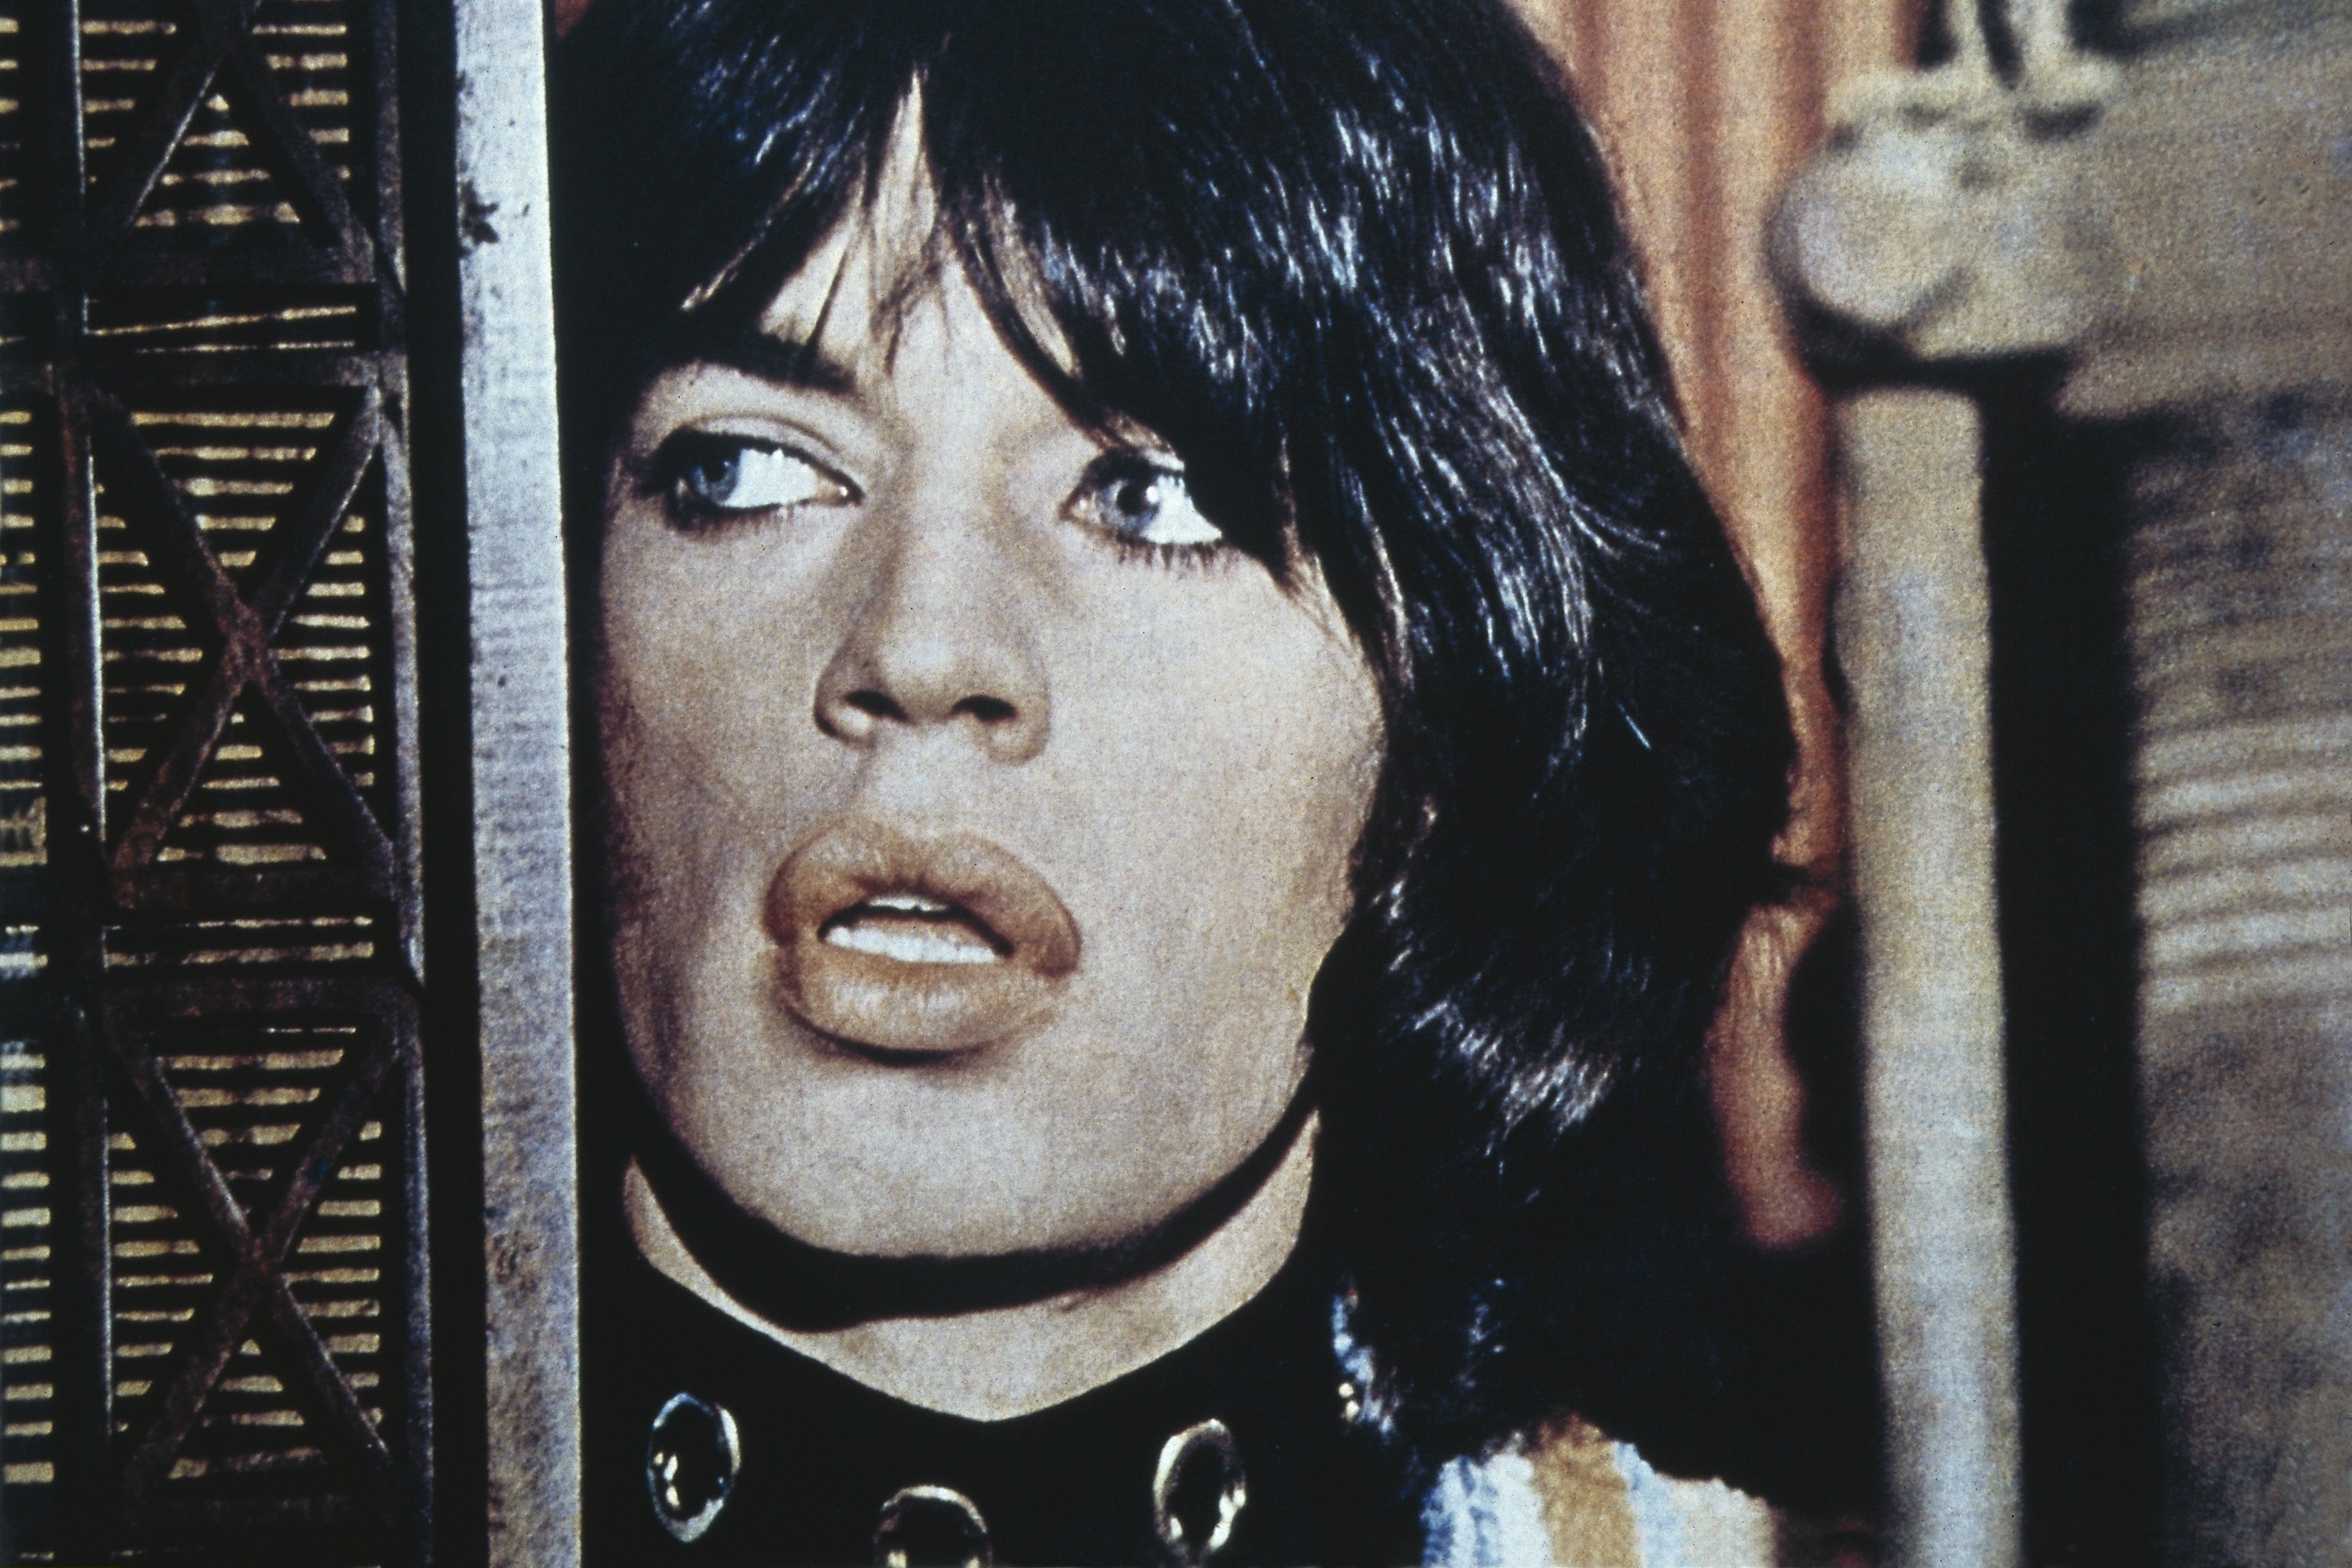 Mick Jagger wearing a necklace